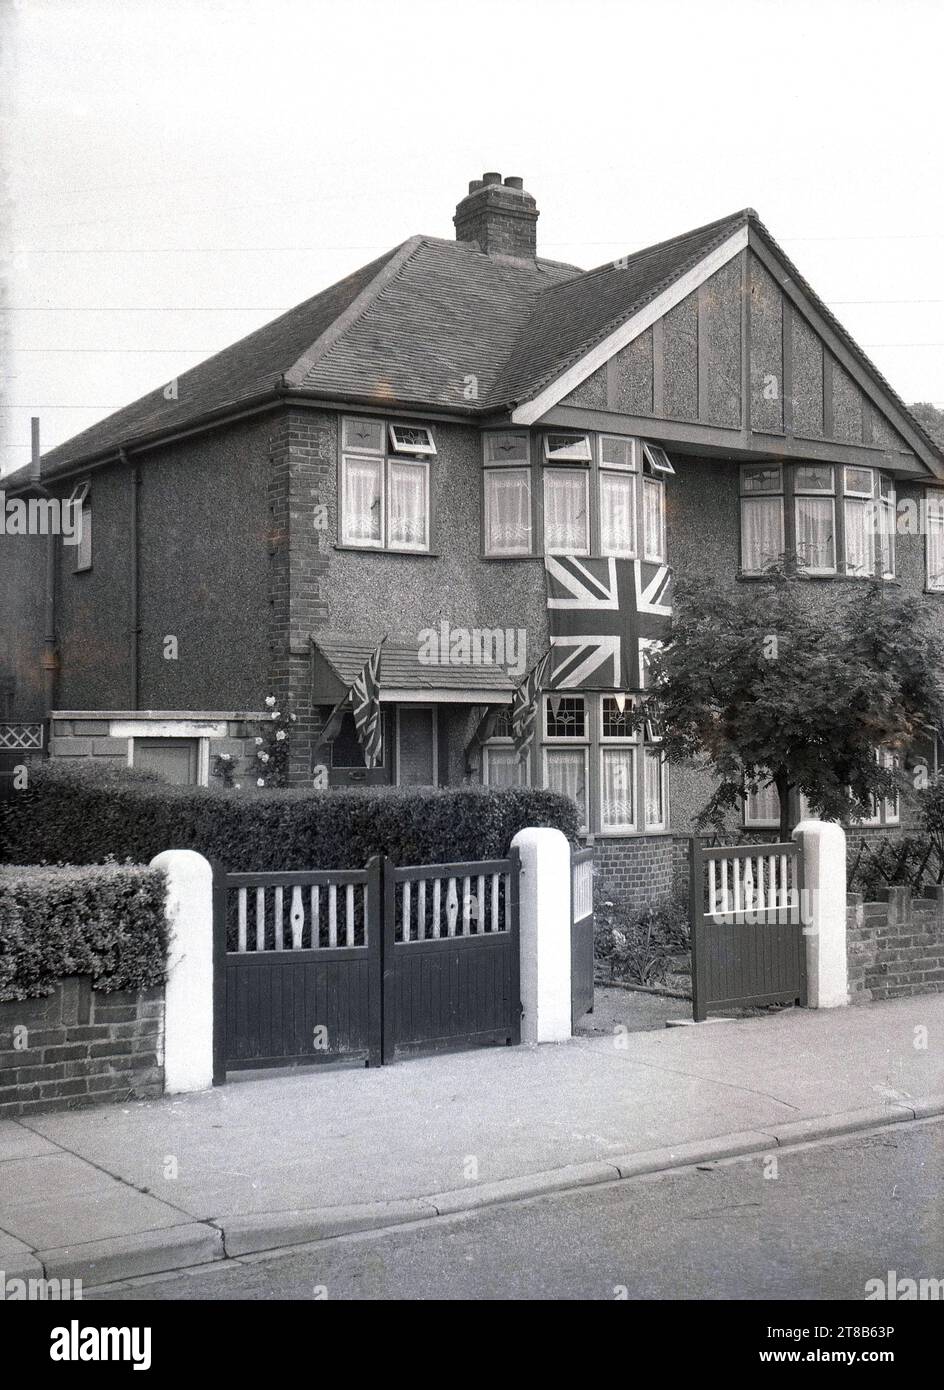 1953, historical, front view of a 1930s built semi-detatched suburban house, pebble-dash rendered, with a large union jack flag on outside, below window, with  smaller flags on the porch, England, UK, in celebration of the Queen's Coronation. Stock Photo